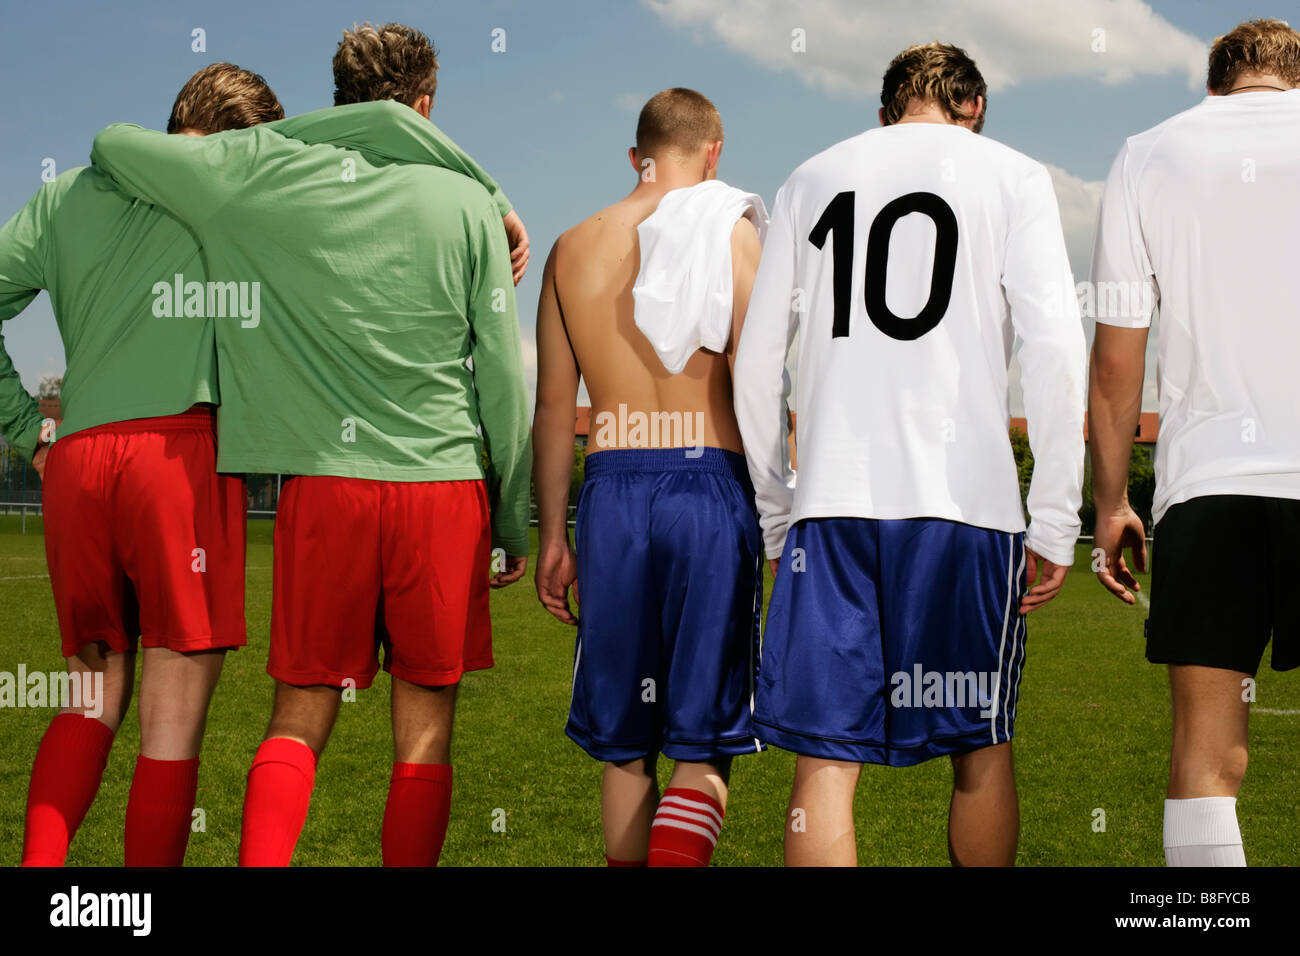 Five footballers of adverse teams walking next to each other, rear view Stock Photo